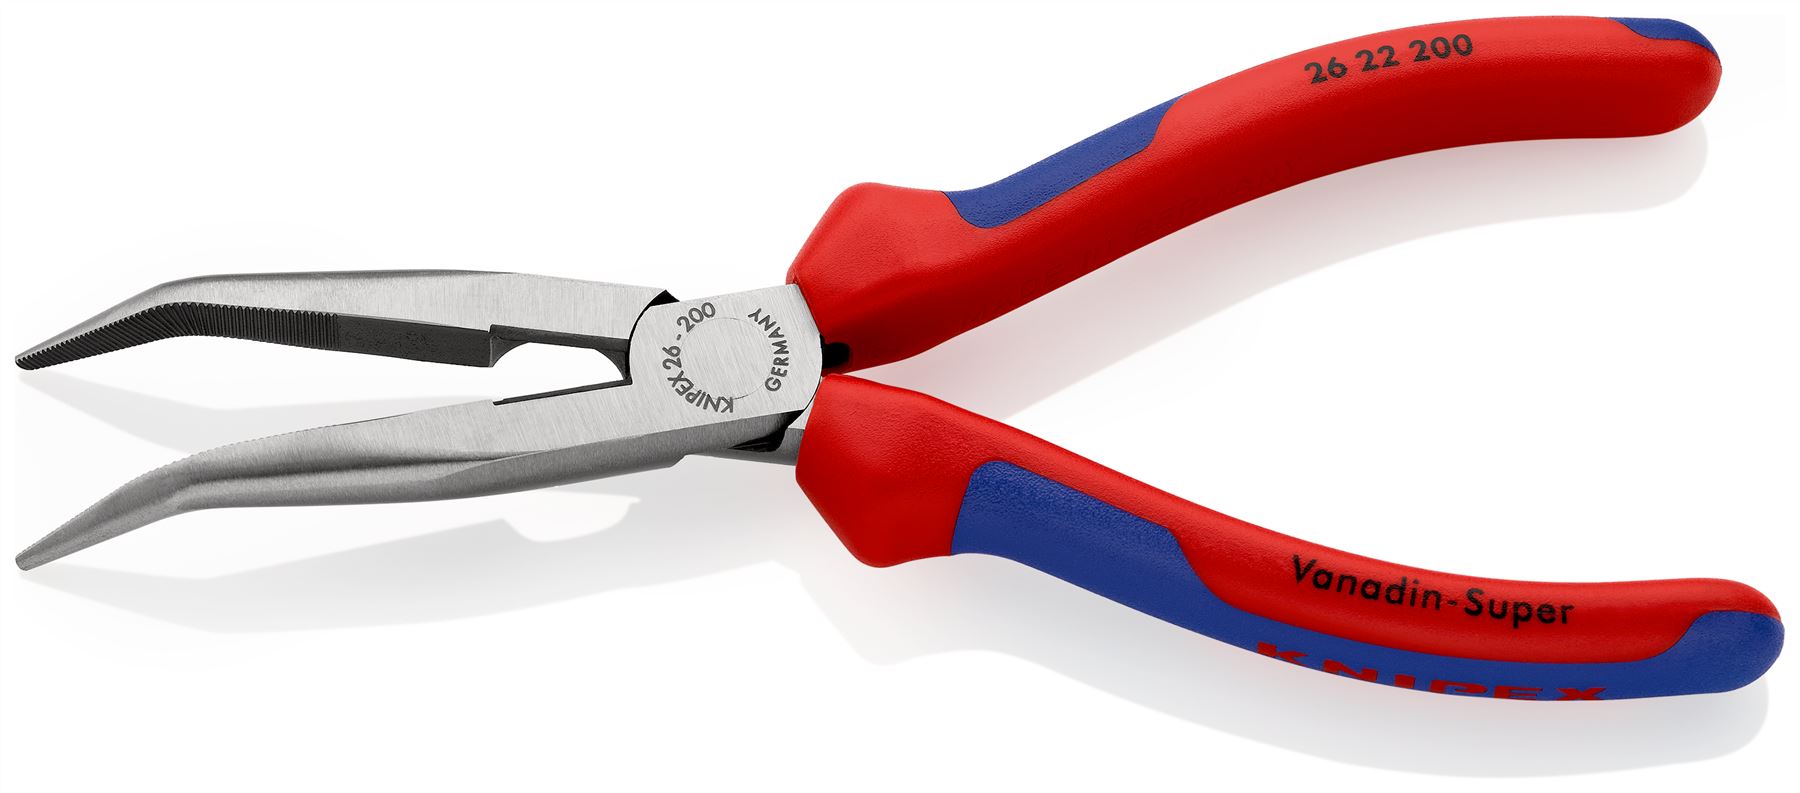 Knipex Snipe Nose Side Cutting Pliers 200mm Multi Component Grips Stork Beak 26 22 200